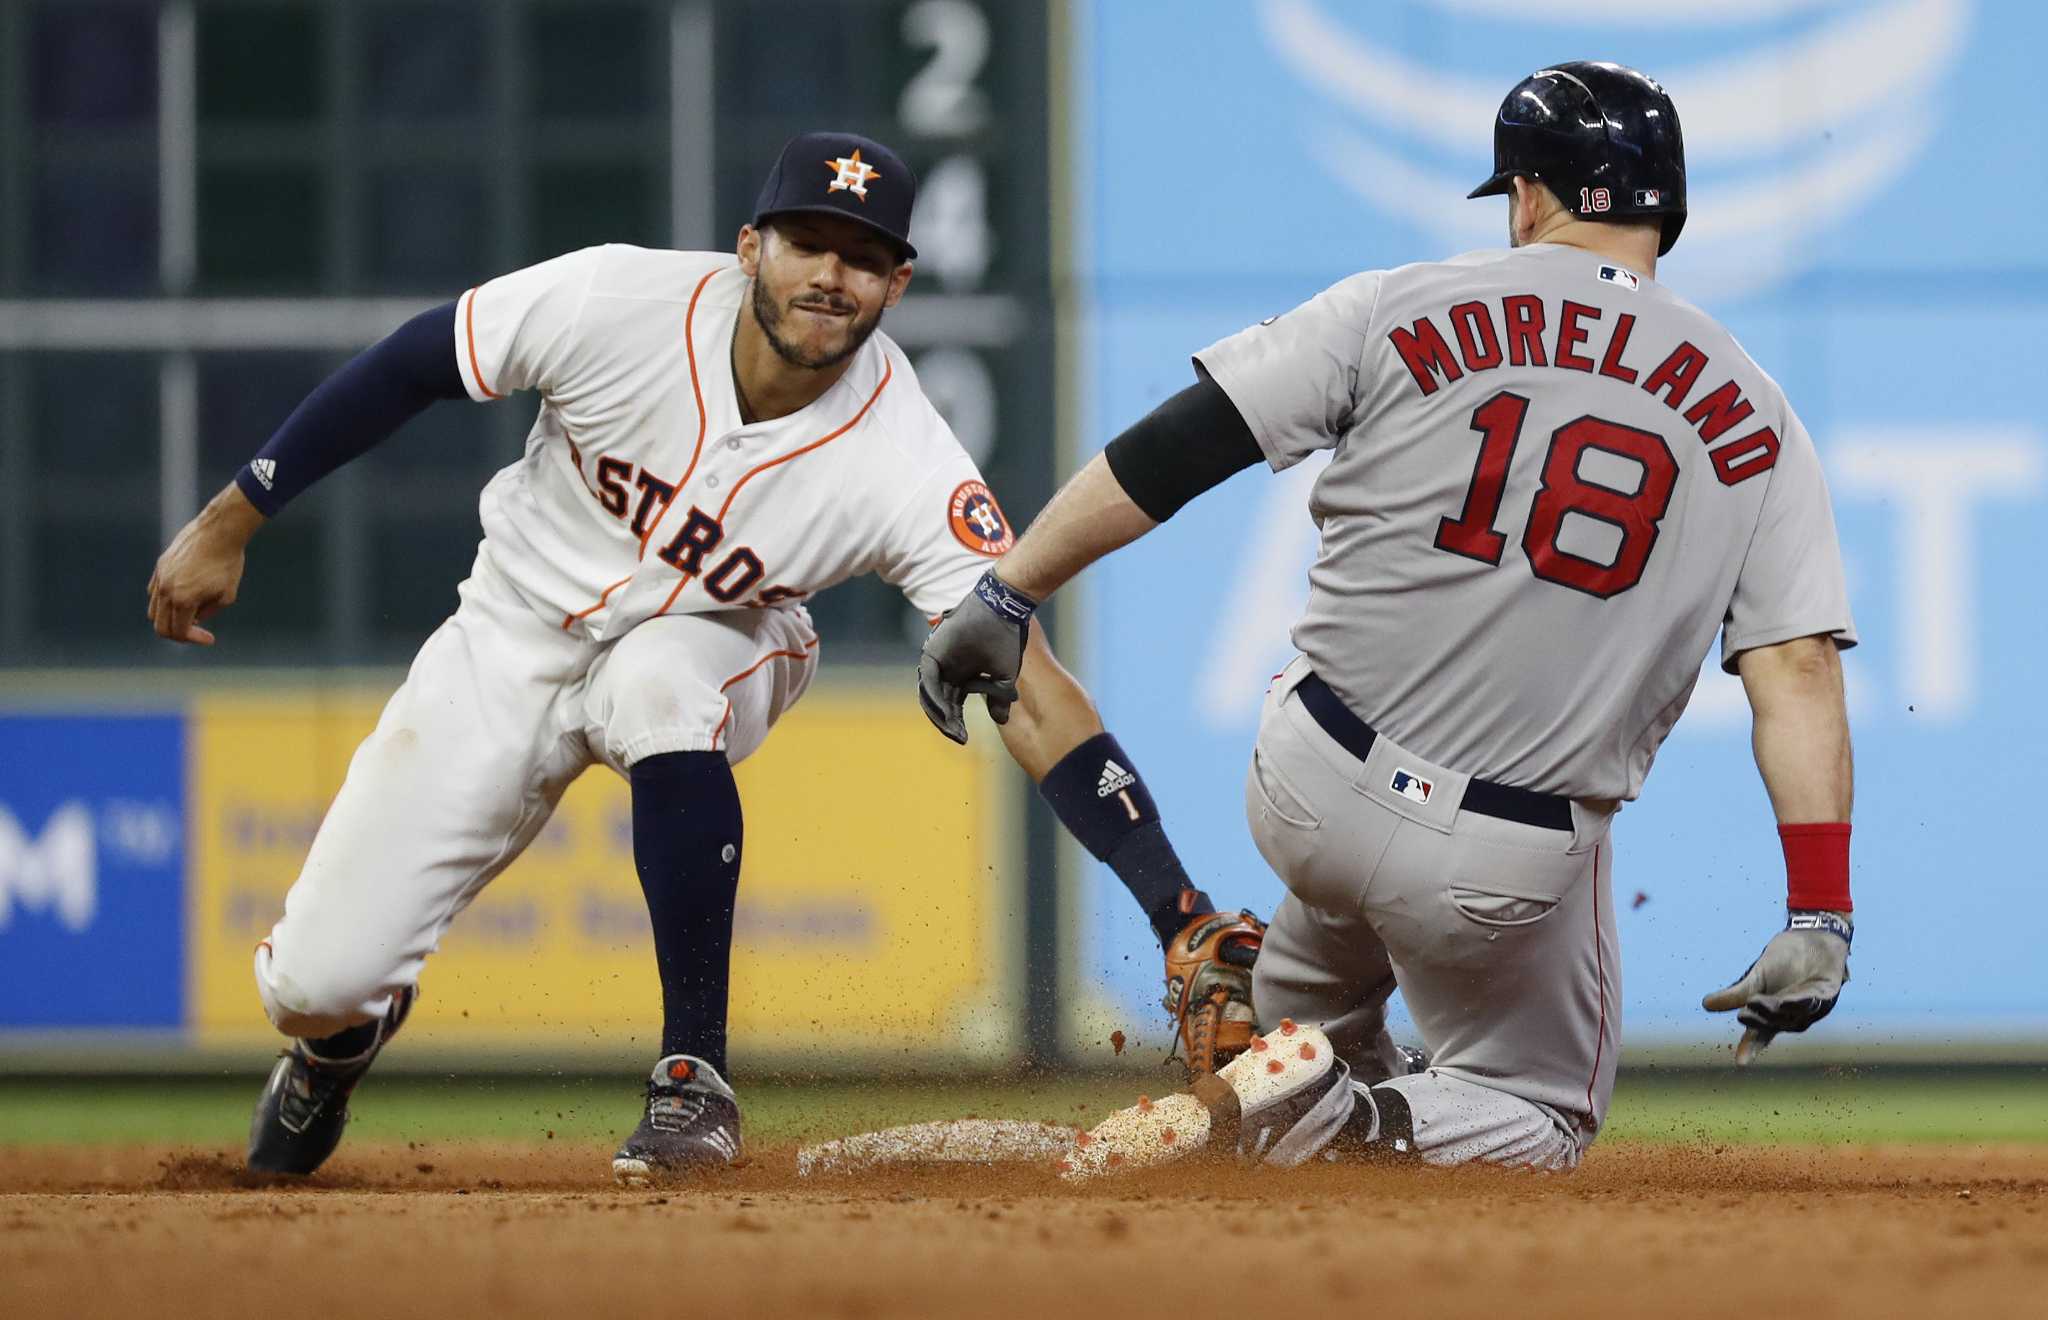 AstrosRed Sox series pits No. 1 pitching staff vs. No. 1 offense